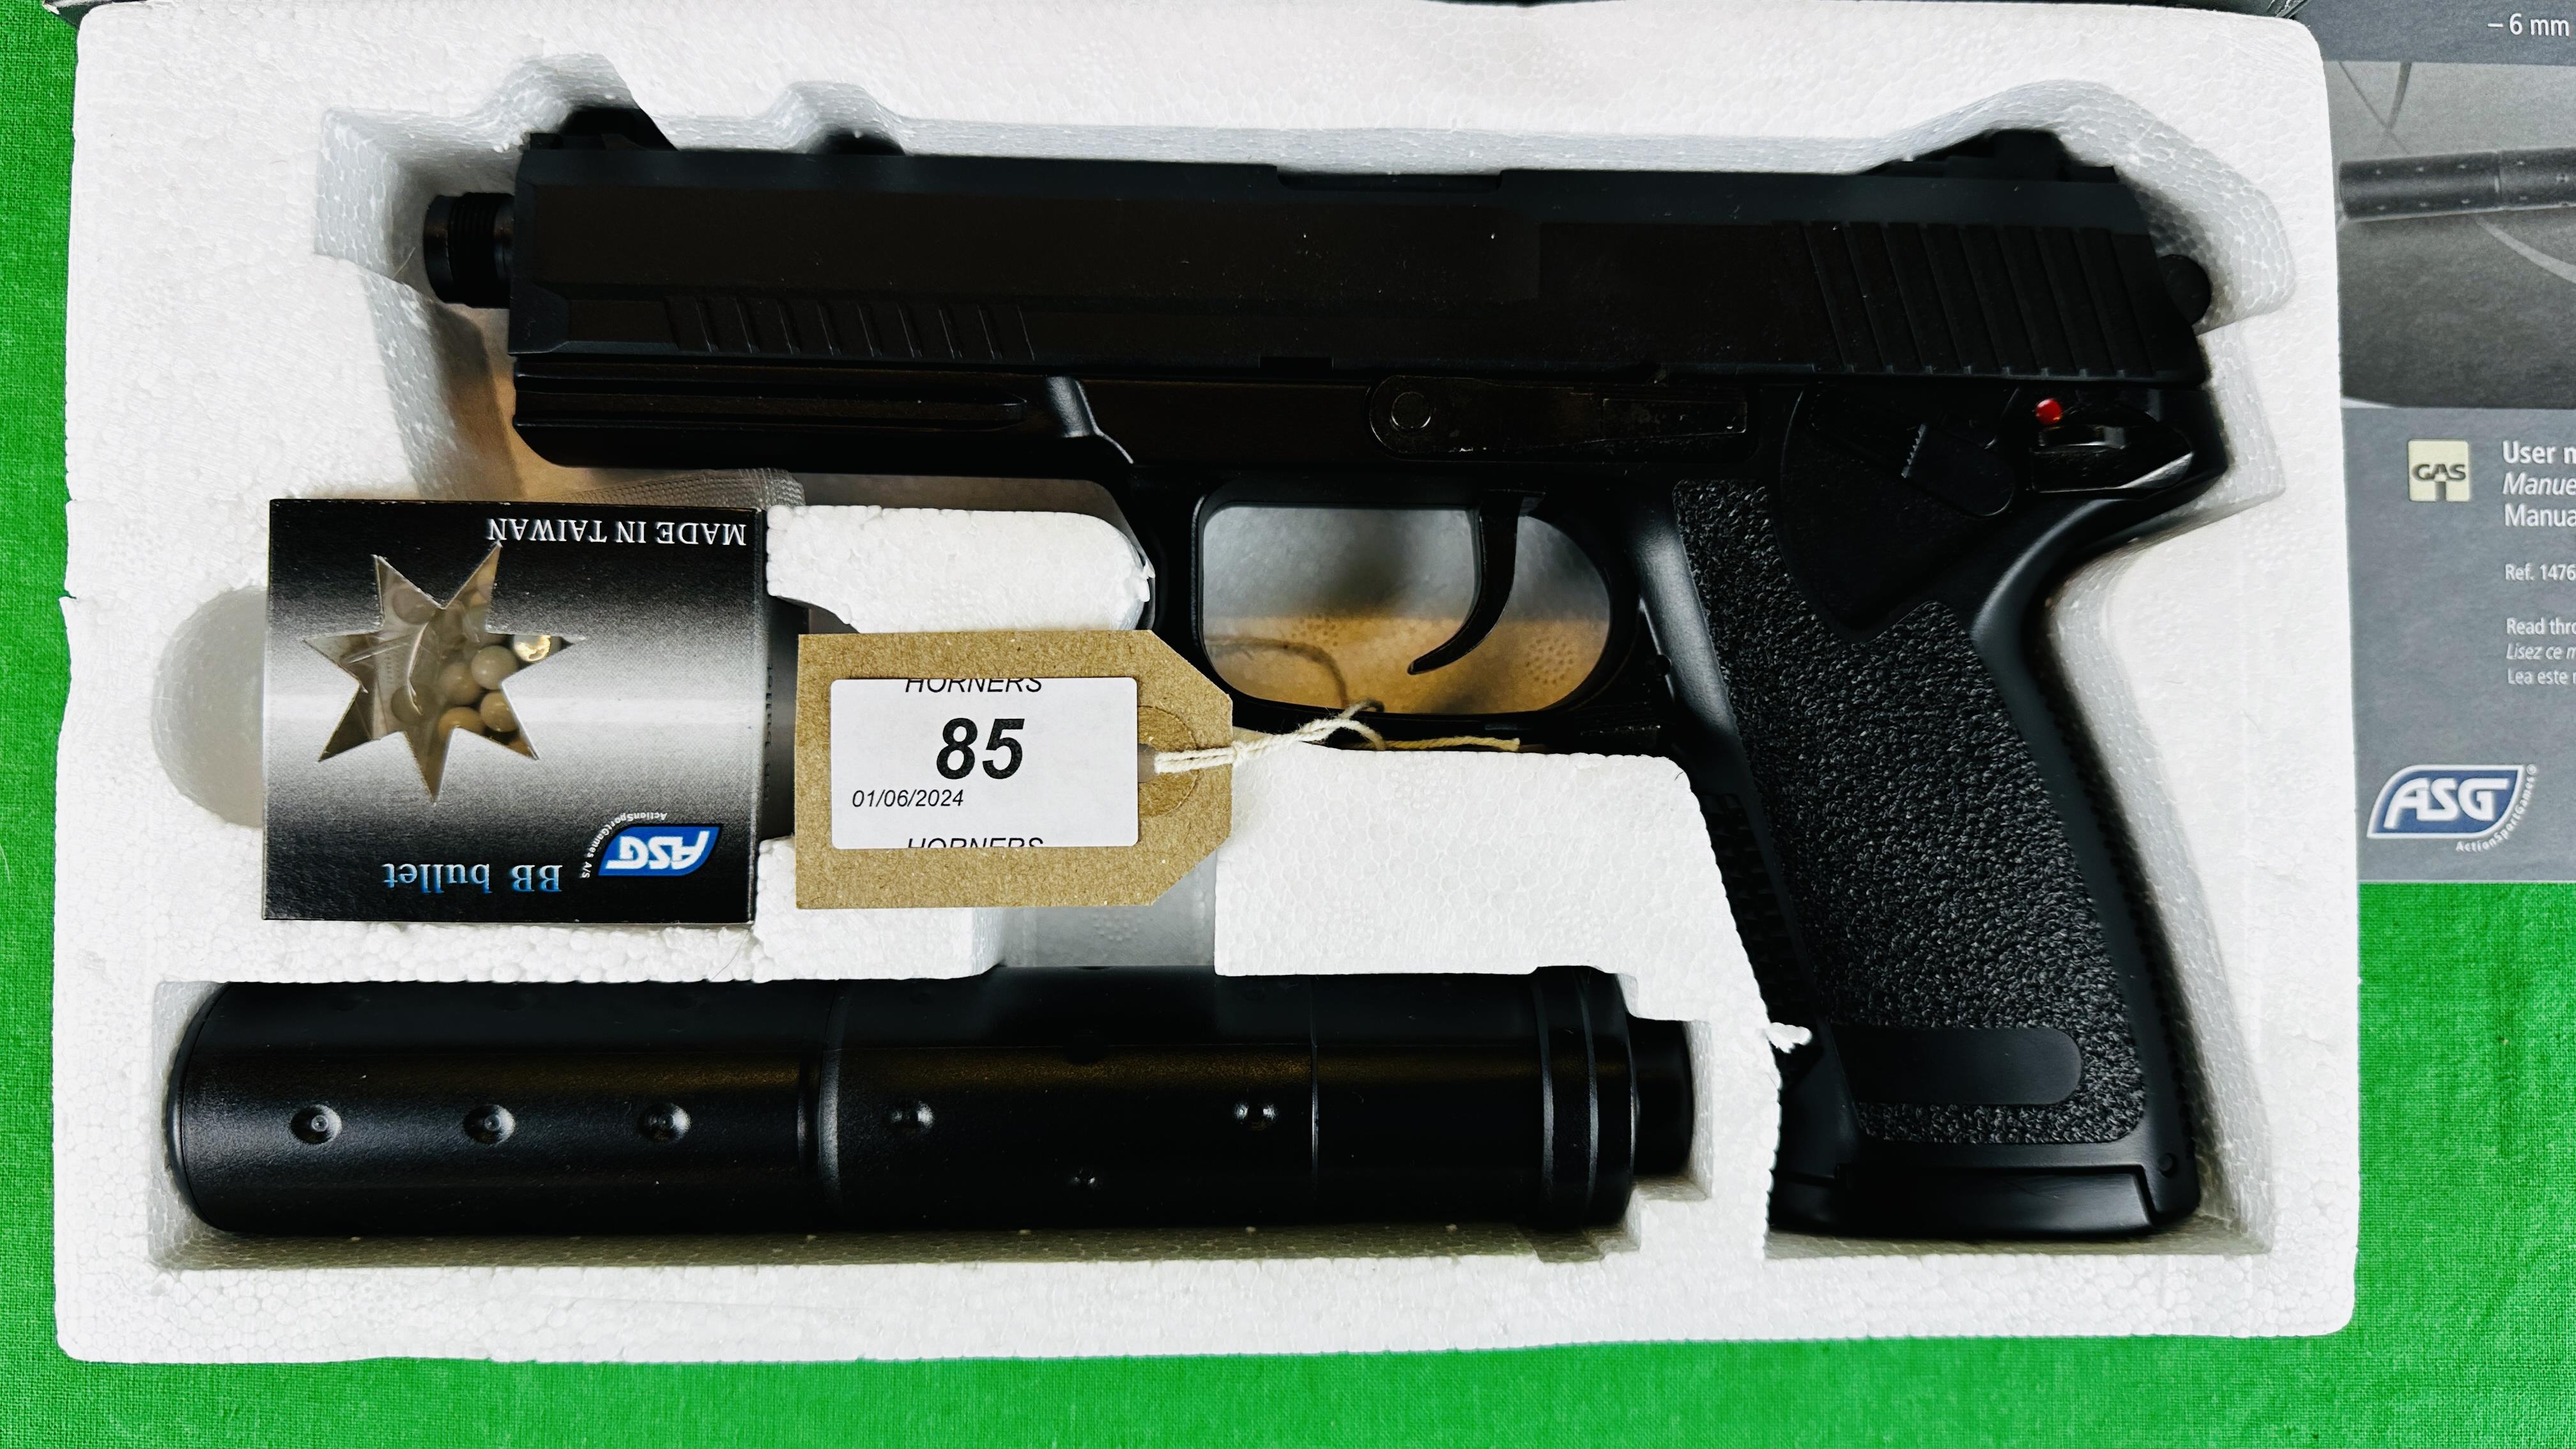 ASG MK23 SPECIAL OPERATION 6MM BB GAS NON-BLOWBACK AIR PISTOL BOXED WITH ACCESSORIES - (ALL GUNS TO - Image 2 of 10